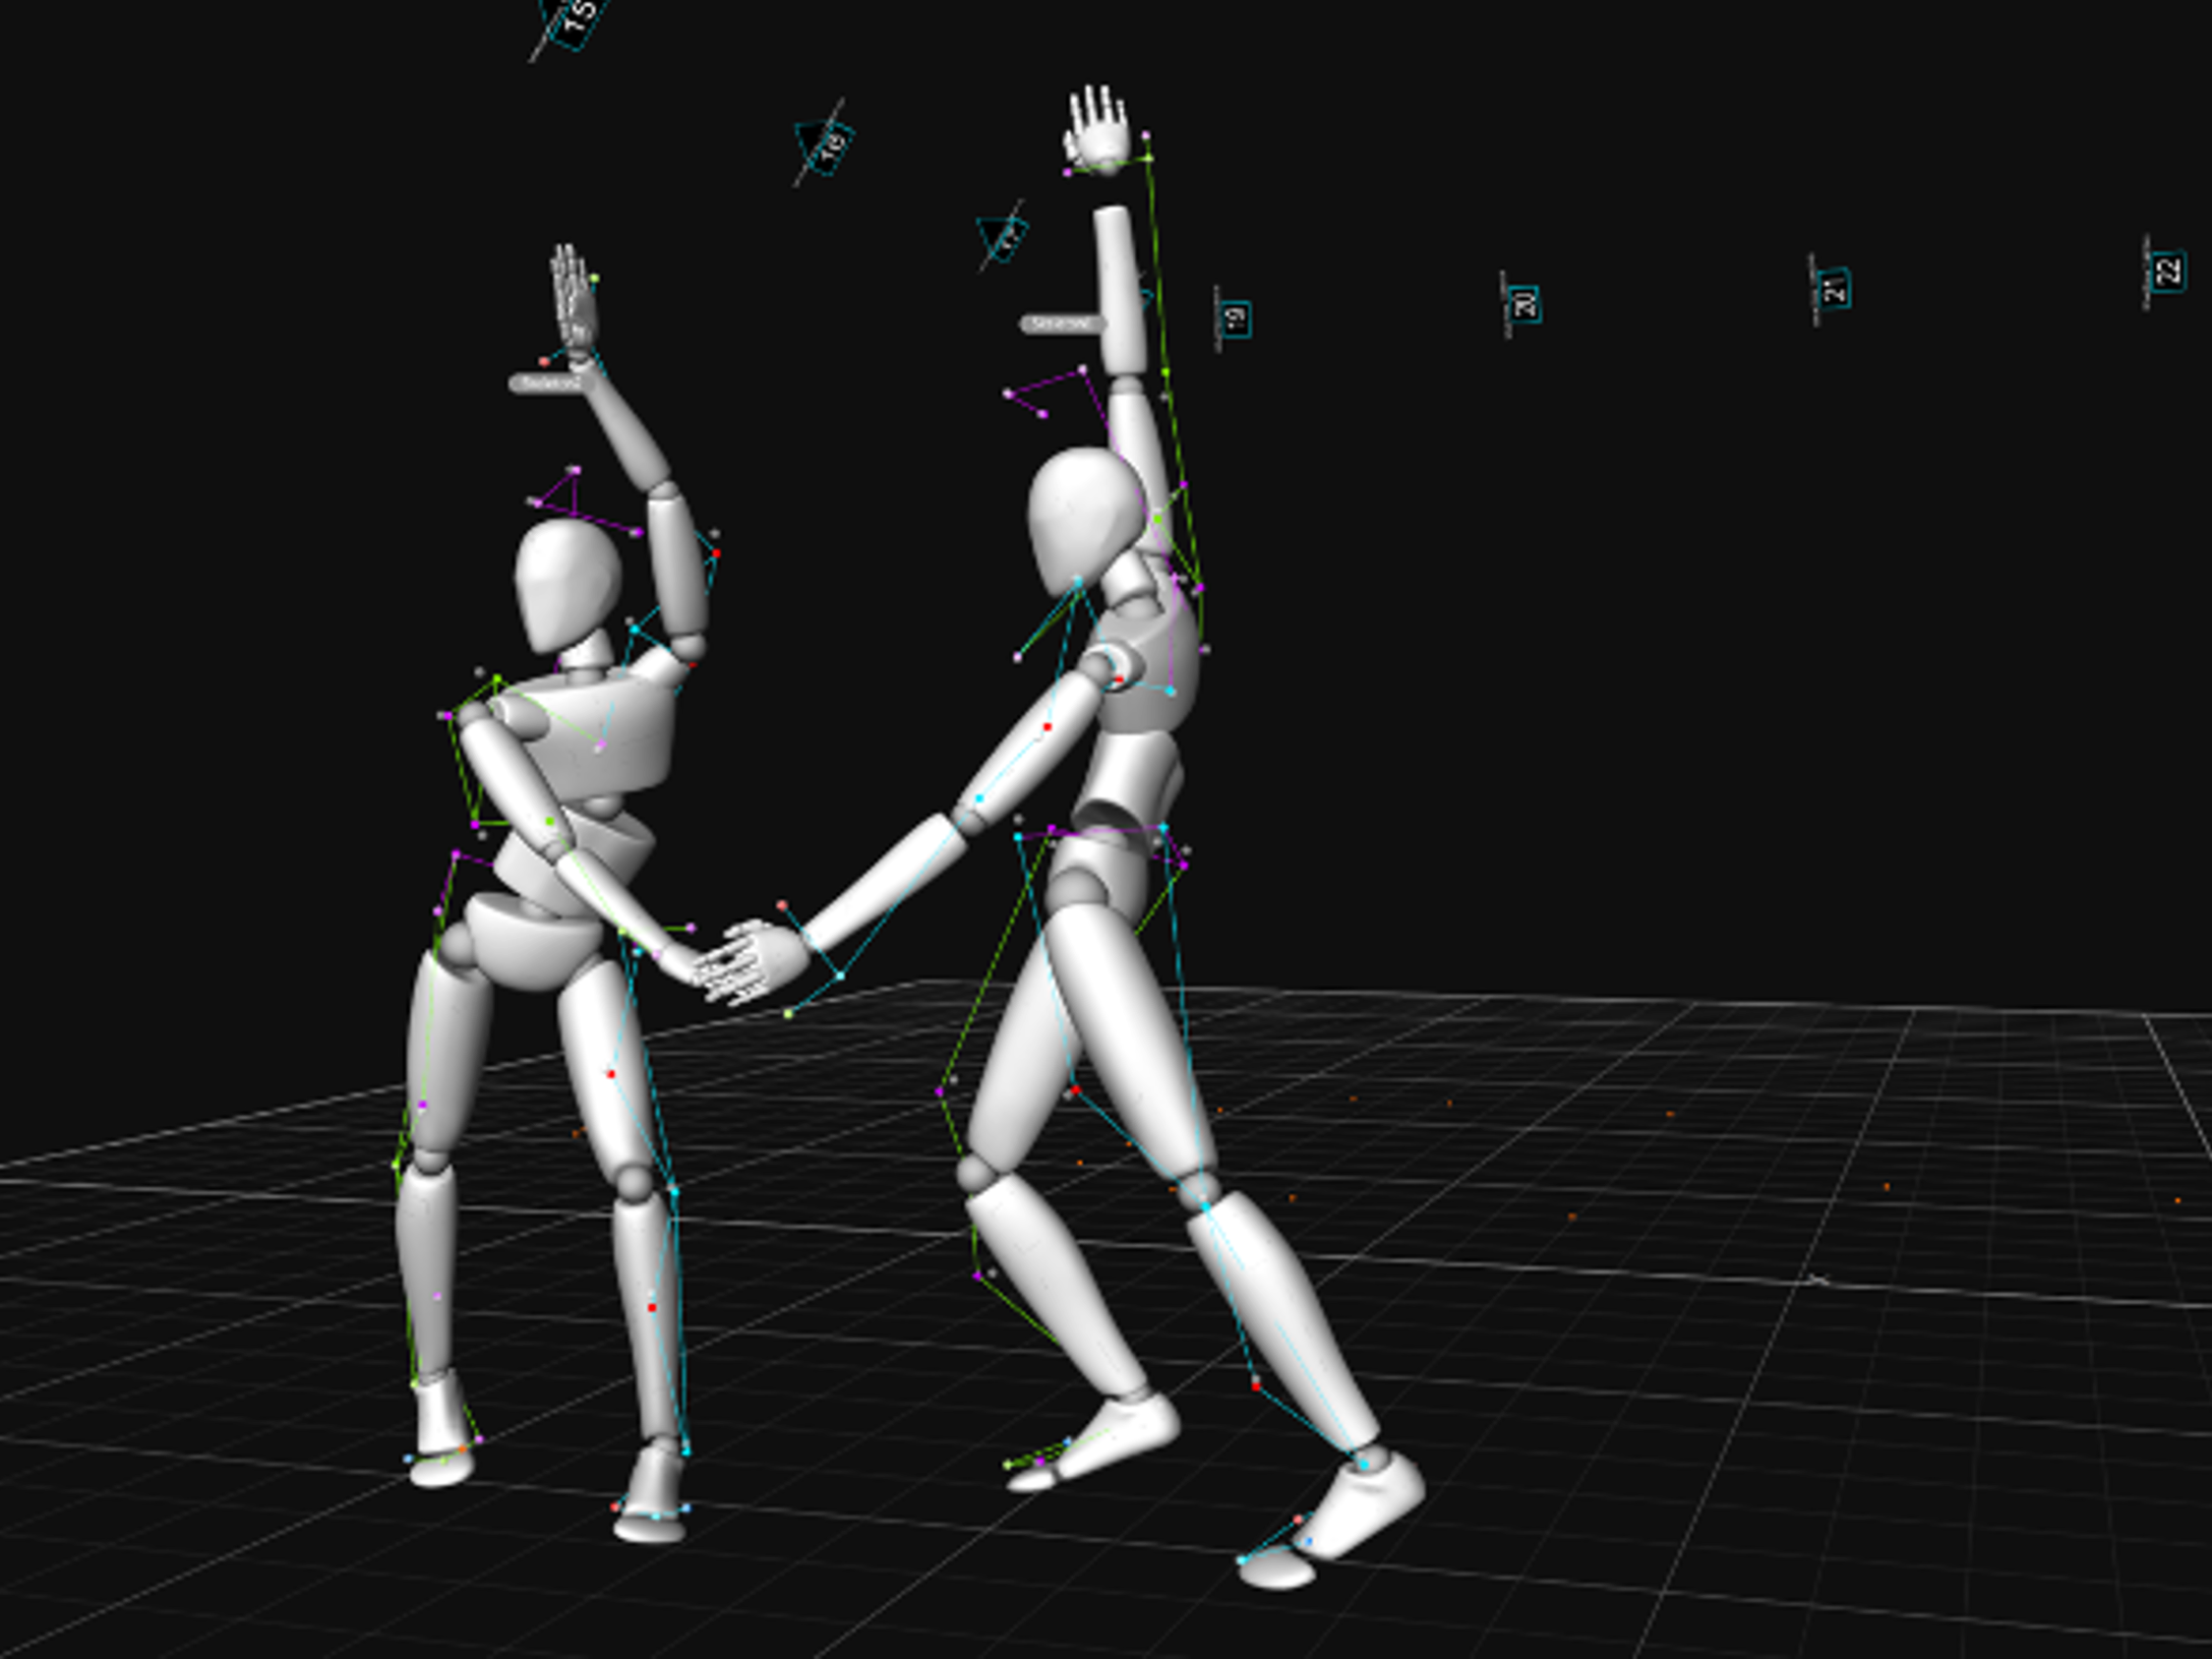 motion capture of two people